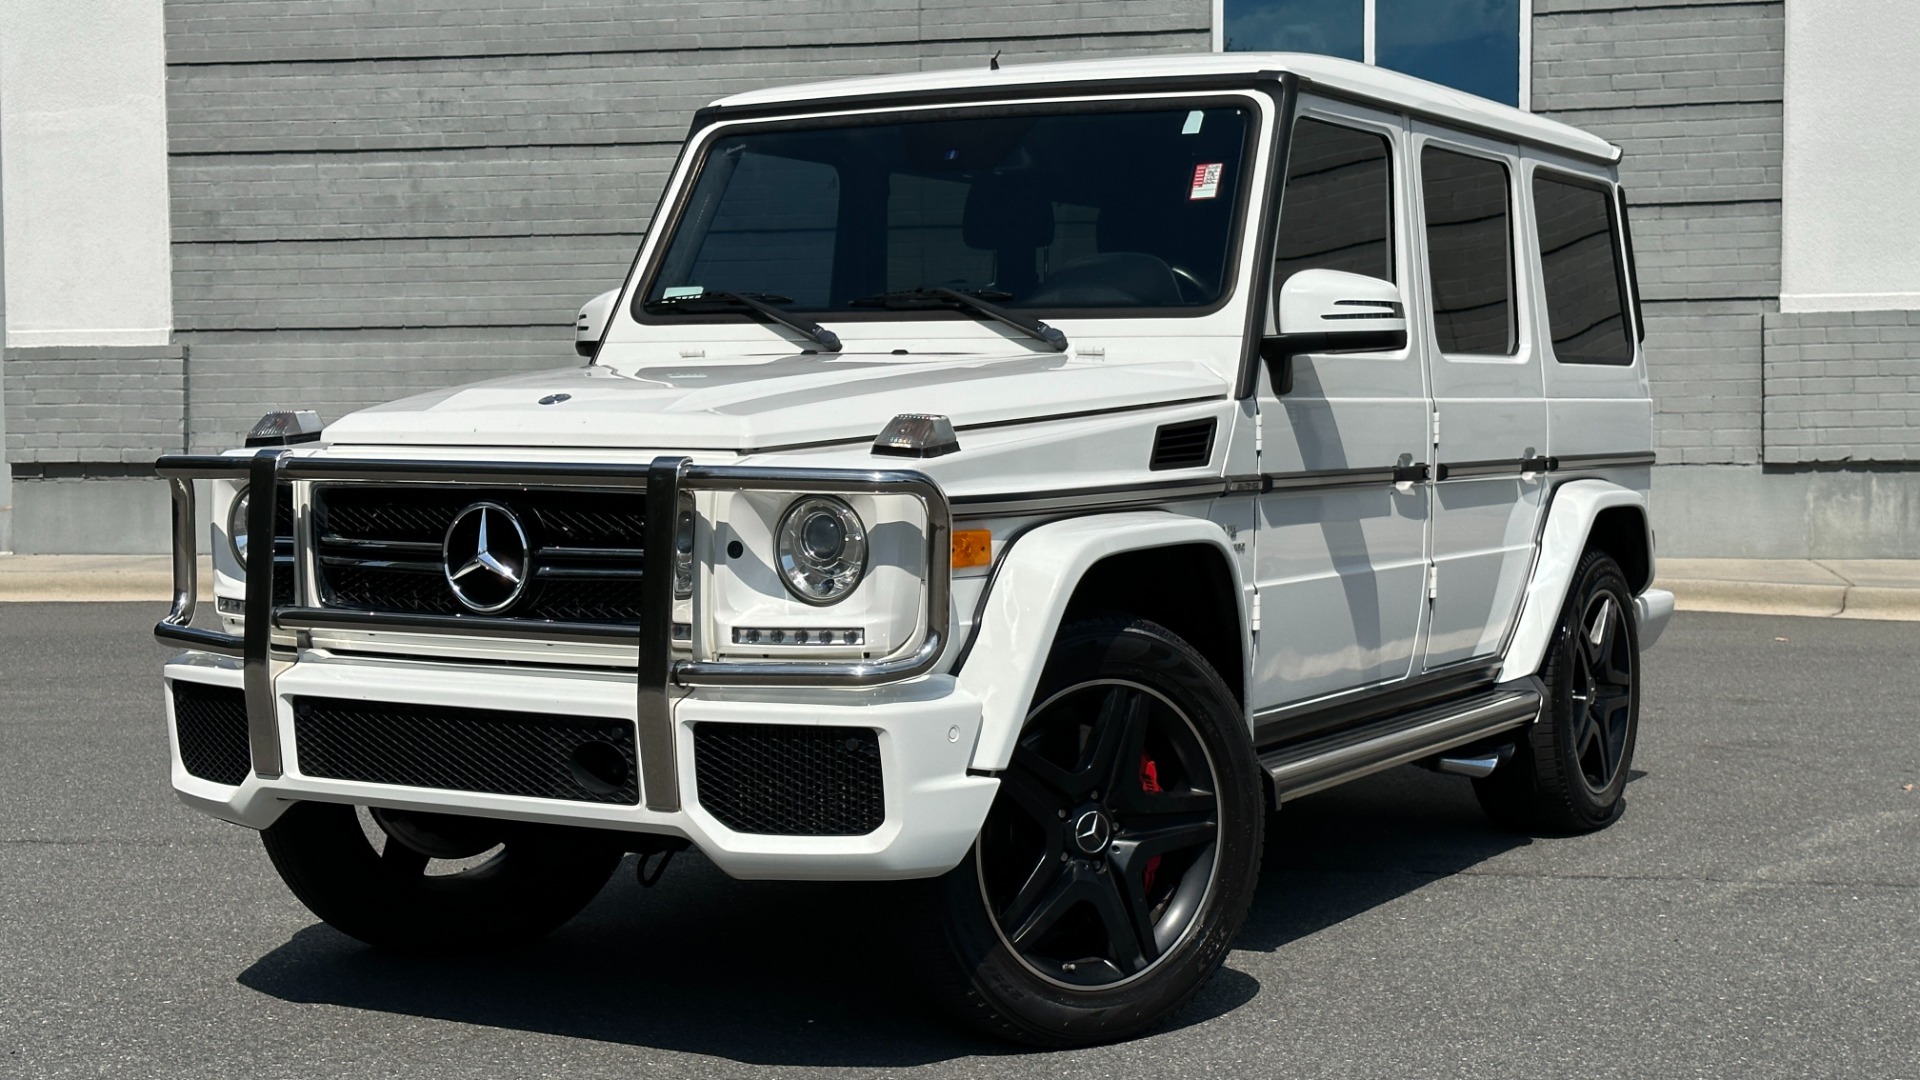 Used 2014 Mercedes-Benz G-Class G 63 AMG / DESIGNO LEATHER / DIAMOND STITCH / SPORTS SEATS / PA6 PKG for sale $67,995 at Formula Imports in Charlotte NC 28227 1